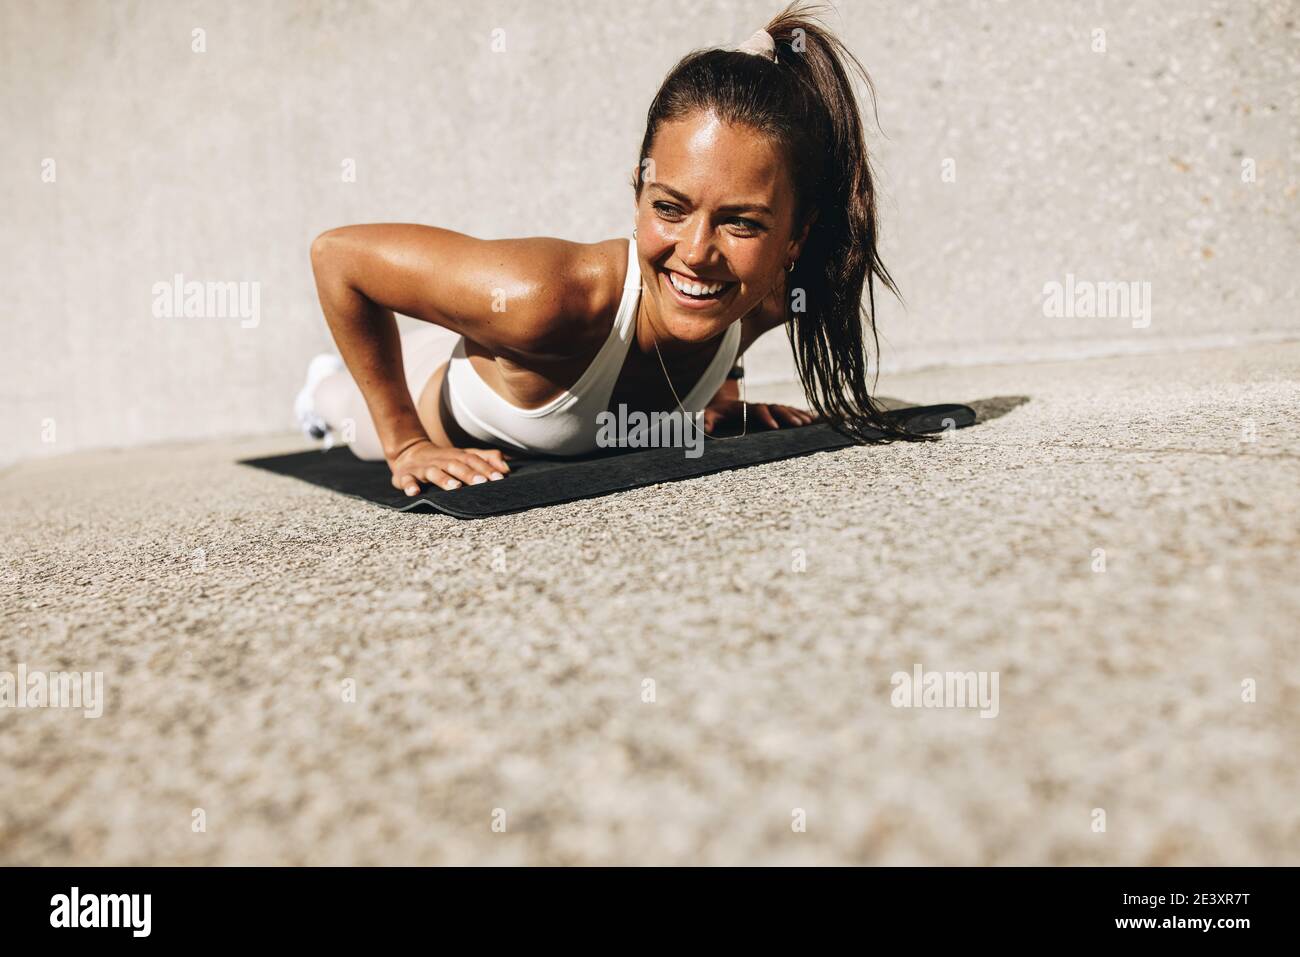 Woman doing push ups on exercise mat. Female in sportswear smiling during her workout. Stock Photo